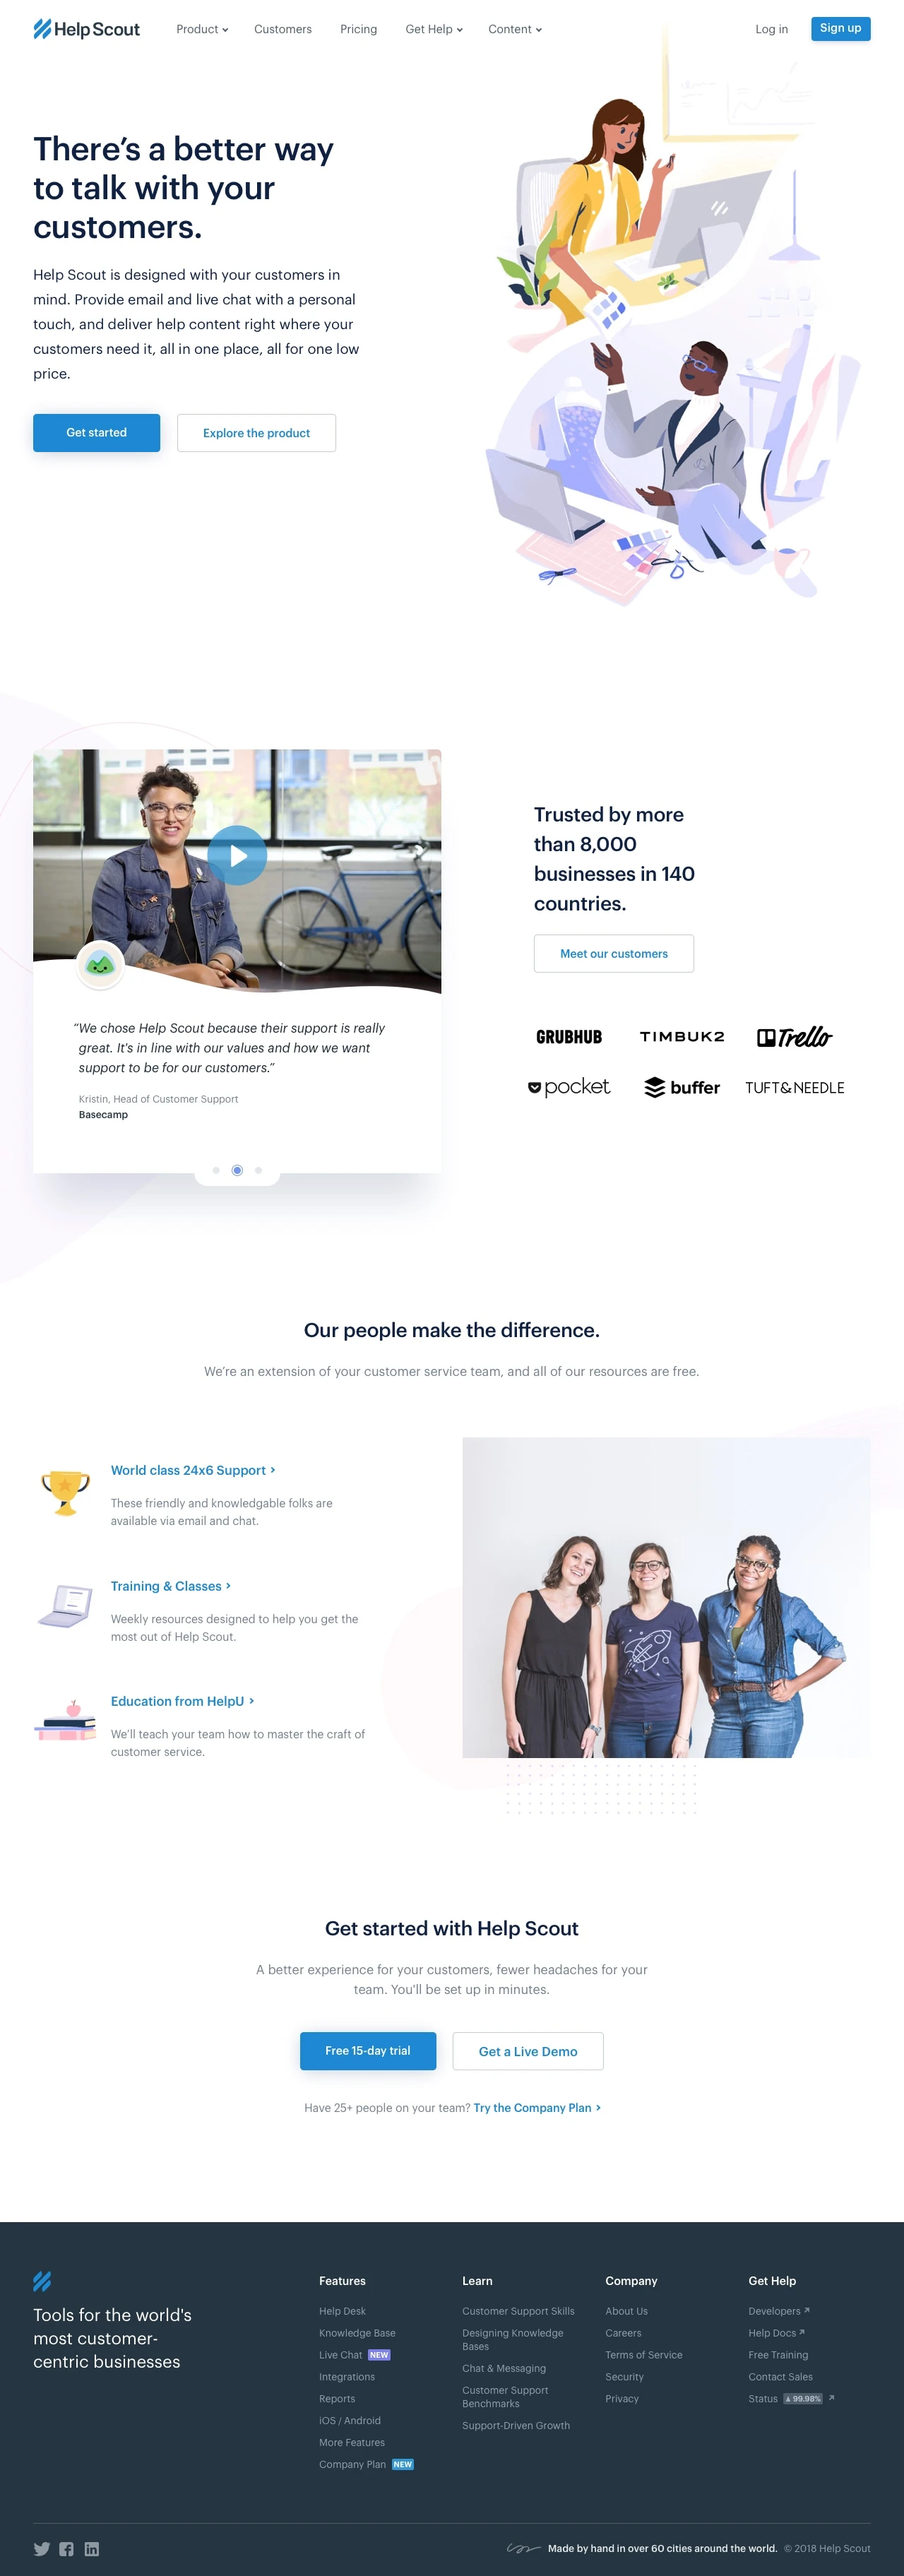 Help Scout Landing Page Example: Help Scout is designed with your customers in mind. Provide email and live chat with a personal touch, and deliver help content right where your customers need it, all in one place, all for one low price.